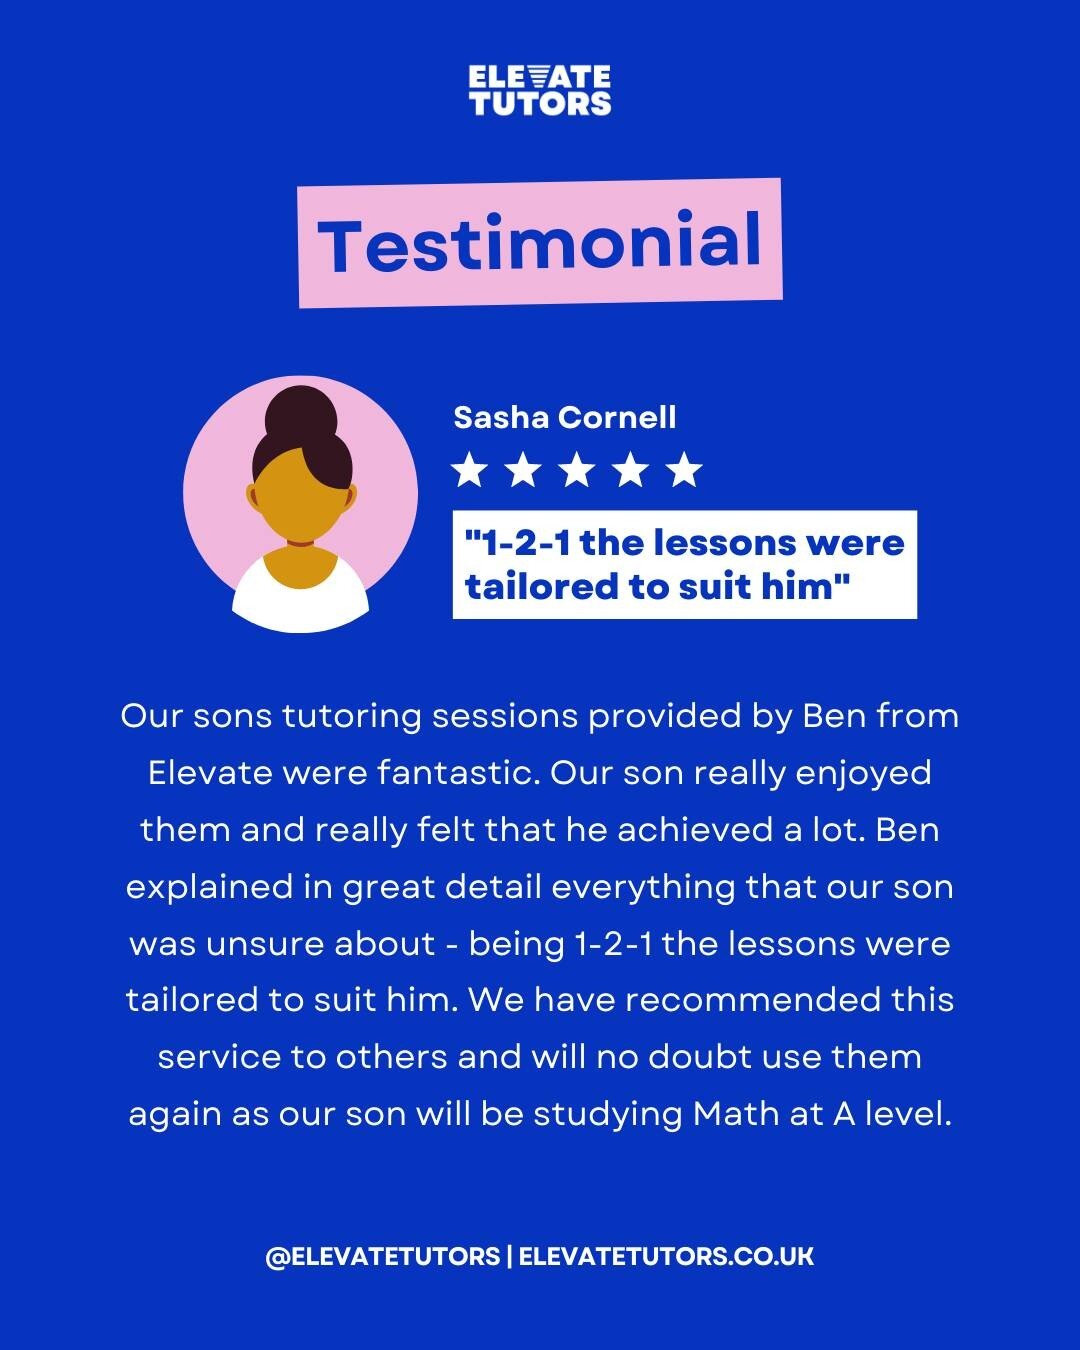 What one of our wonderful clients said about our tutoring services 🙌🏼

Need a tutor? Get in touch with us today!
 ⠀⠀⠀⠀⠀⠀⠀⠀⠀⠀⠀⠀
 ⠀⠀⠀⠀⠀⠀⠀⠀⠀⠀⠀⠀
 ⠀⠀⠀⠀⠀⠀⠀⠀⠀⠀⠀⠀
 ⠀⠀⠀⠀⠀⠀⠀⠀⠀⠀⠀⠀
 ⠀⠀⠀⠀⠀⠀⠀⠀⠀⠀⠀⠀
 ⠀⠀⠀⠀⠀⠀⠀⠀⠀⠀⠀⠀
 ⠀⠀⠀⠀⠀⠀⠀⠀⠀⠀⠀⠀
 ⠀⠀⠀⠀⠀⠀⠀⠀⠀⠀⠀⠀
#onlineeducation #tutor